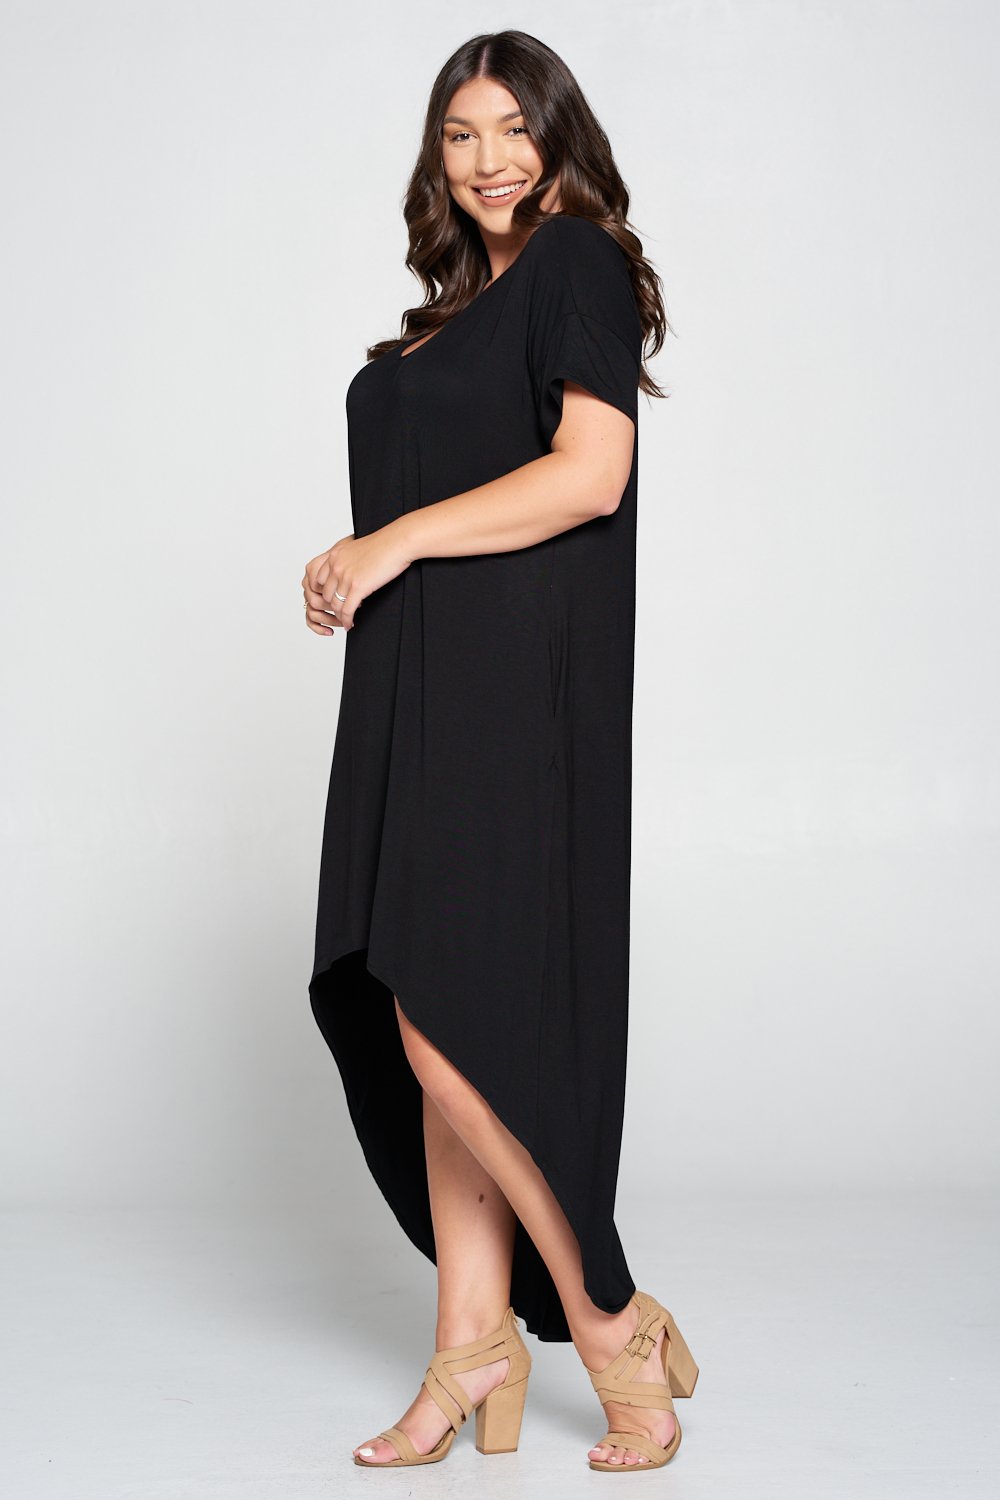 livd L I V D women's contemporary plus size clothing high low hi lo dress with pockets v neck sleeves in black